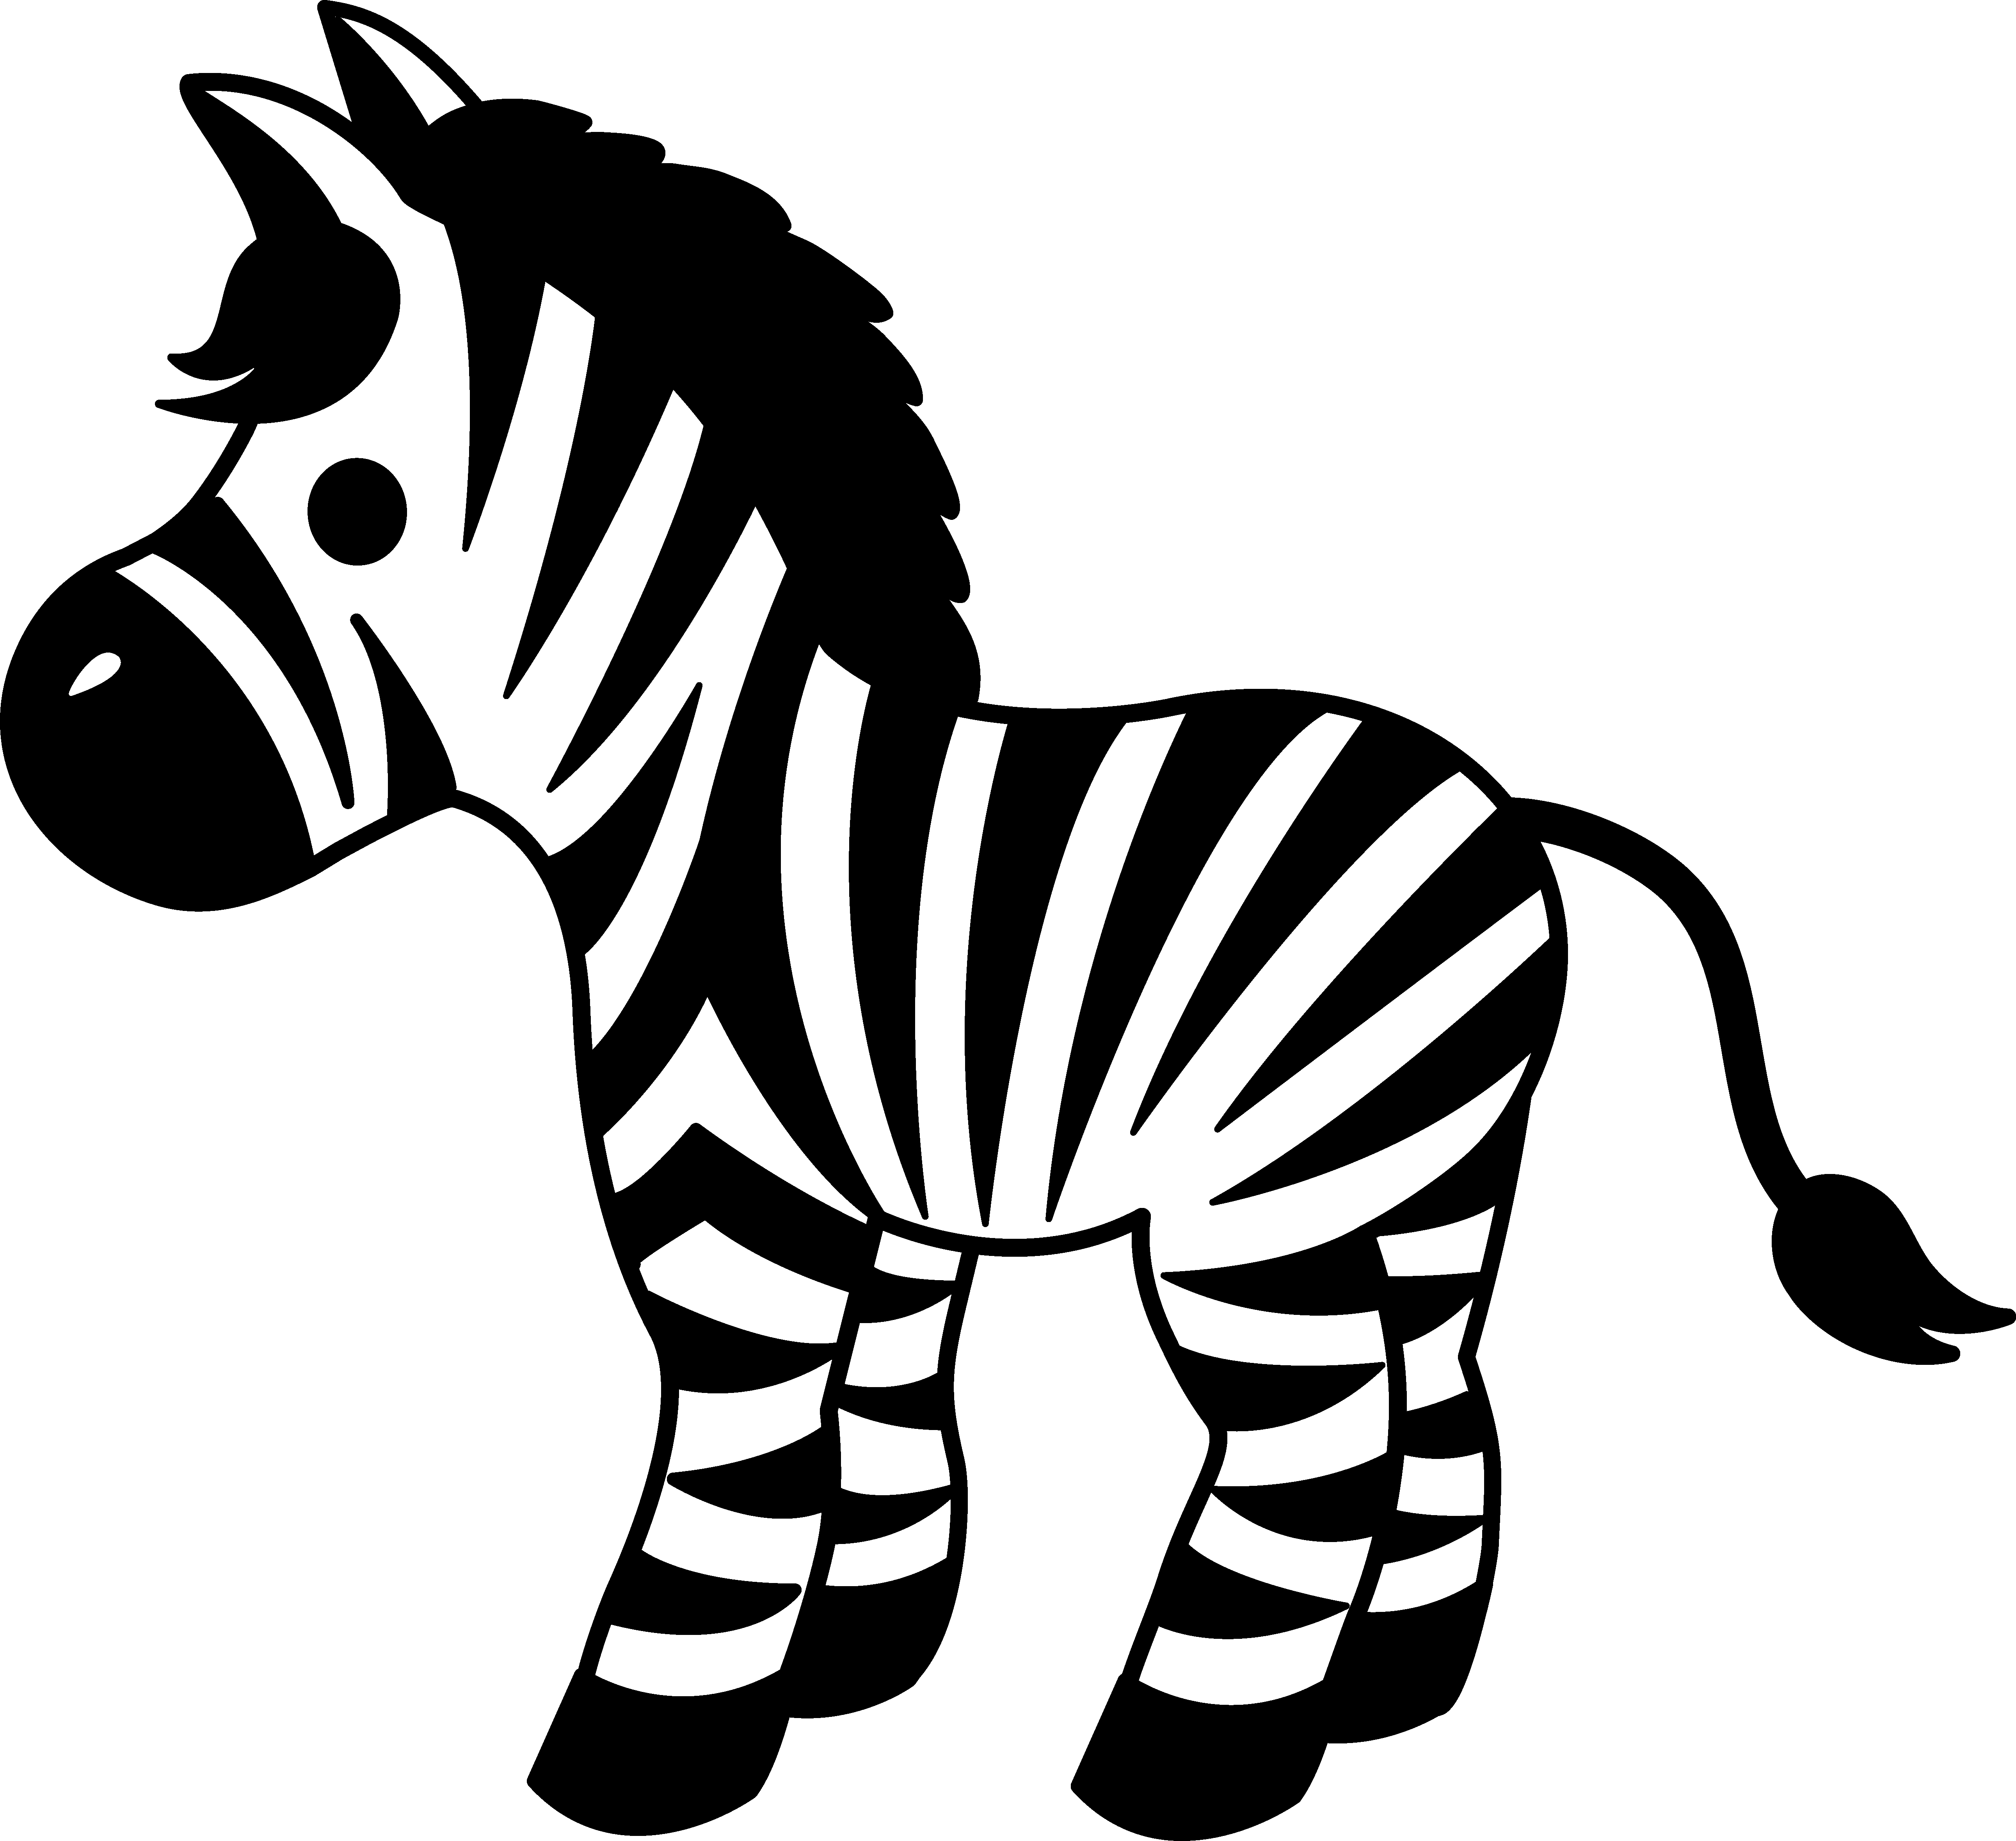 Nail clipart black and white. Cute baby zebra drawing